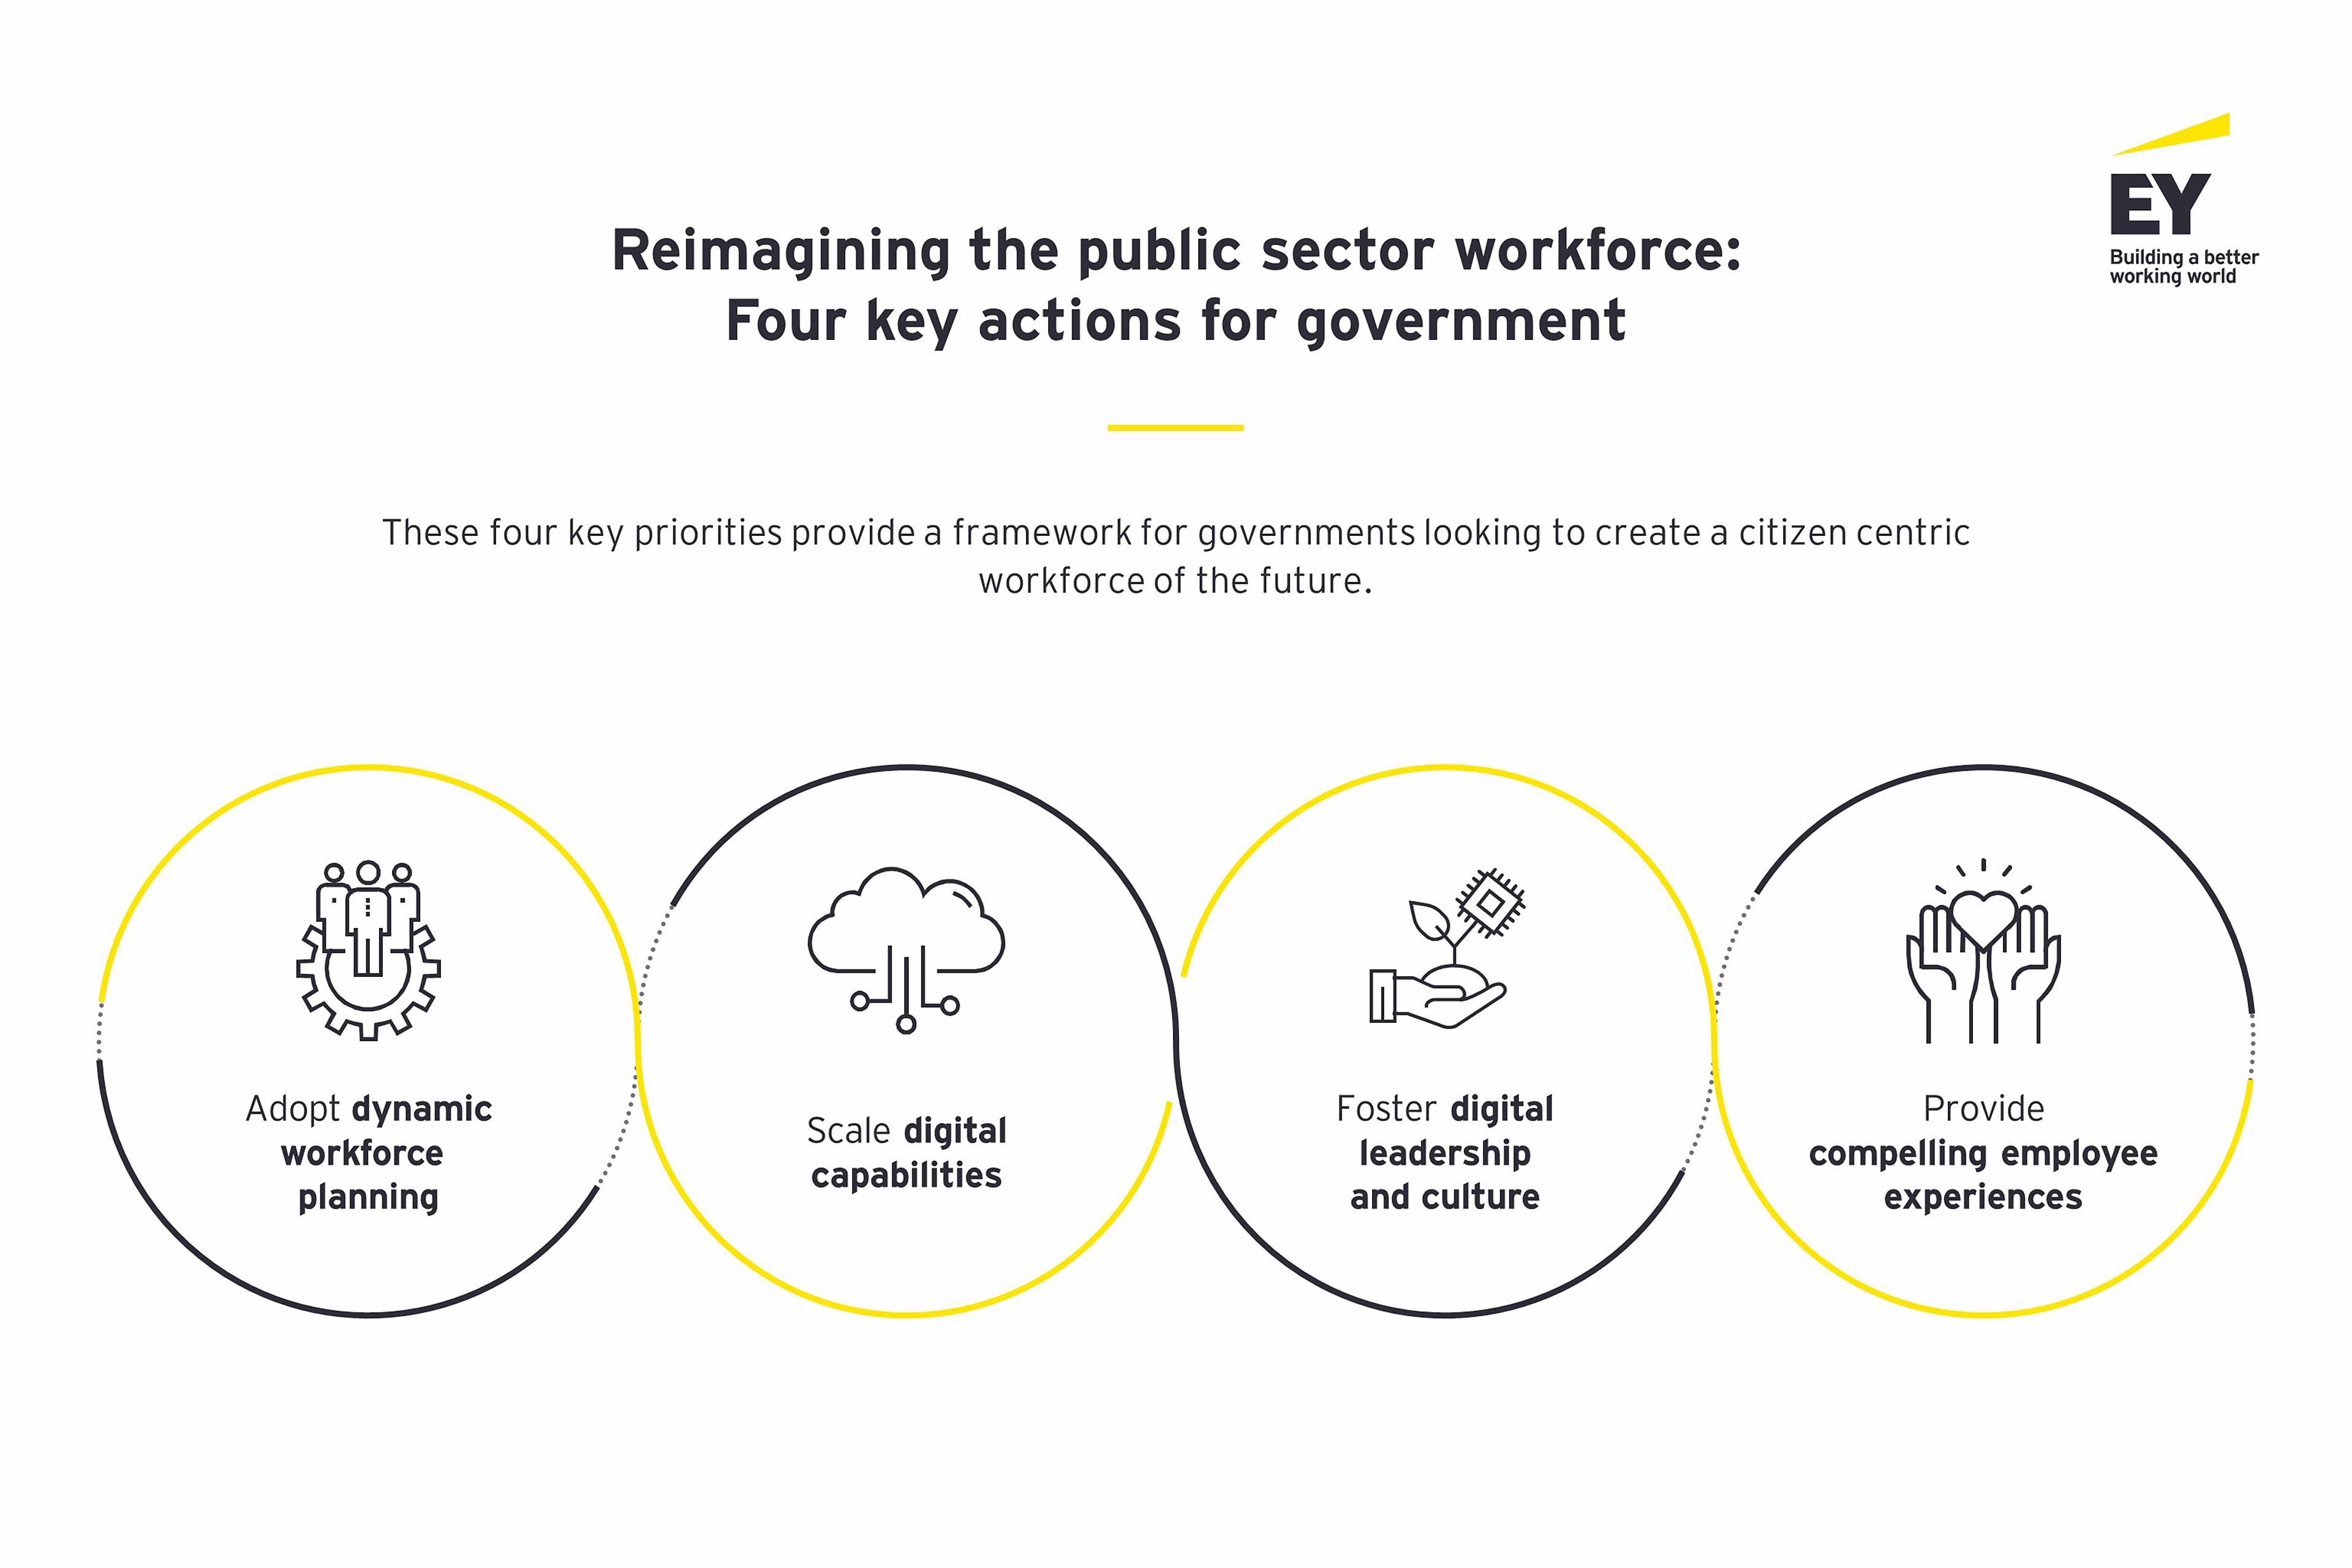 The four key actions for governments to reimagine the public sector workforce